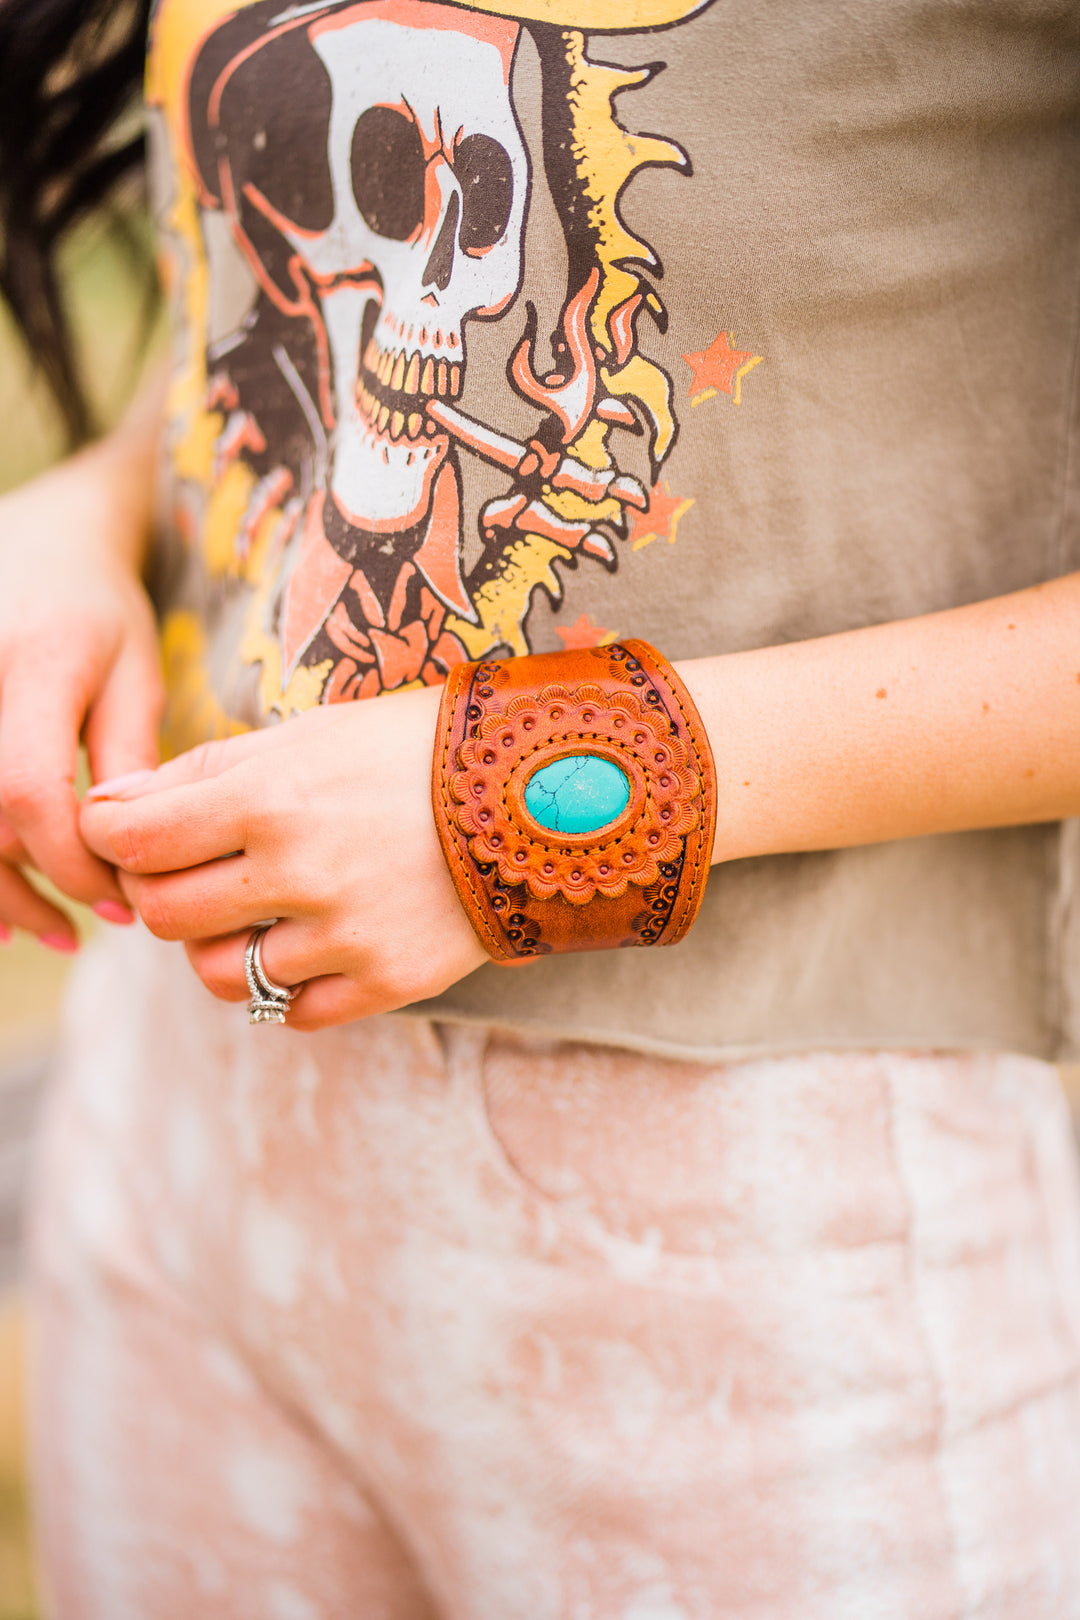 American Darling Tooled Stone Bracelet - Middle West Apparel